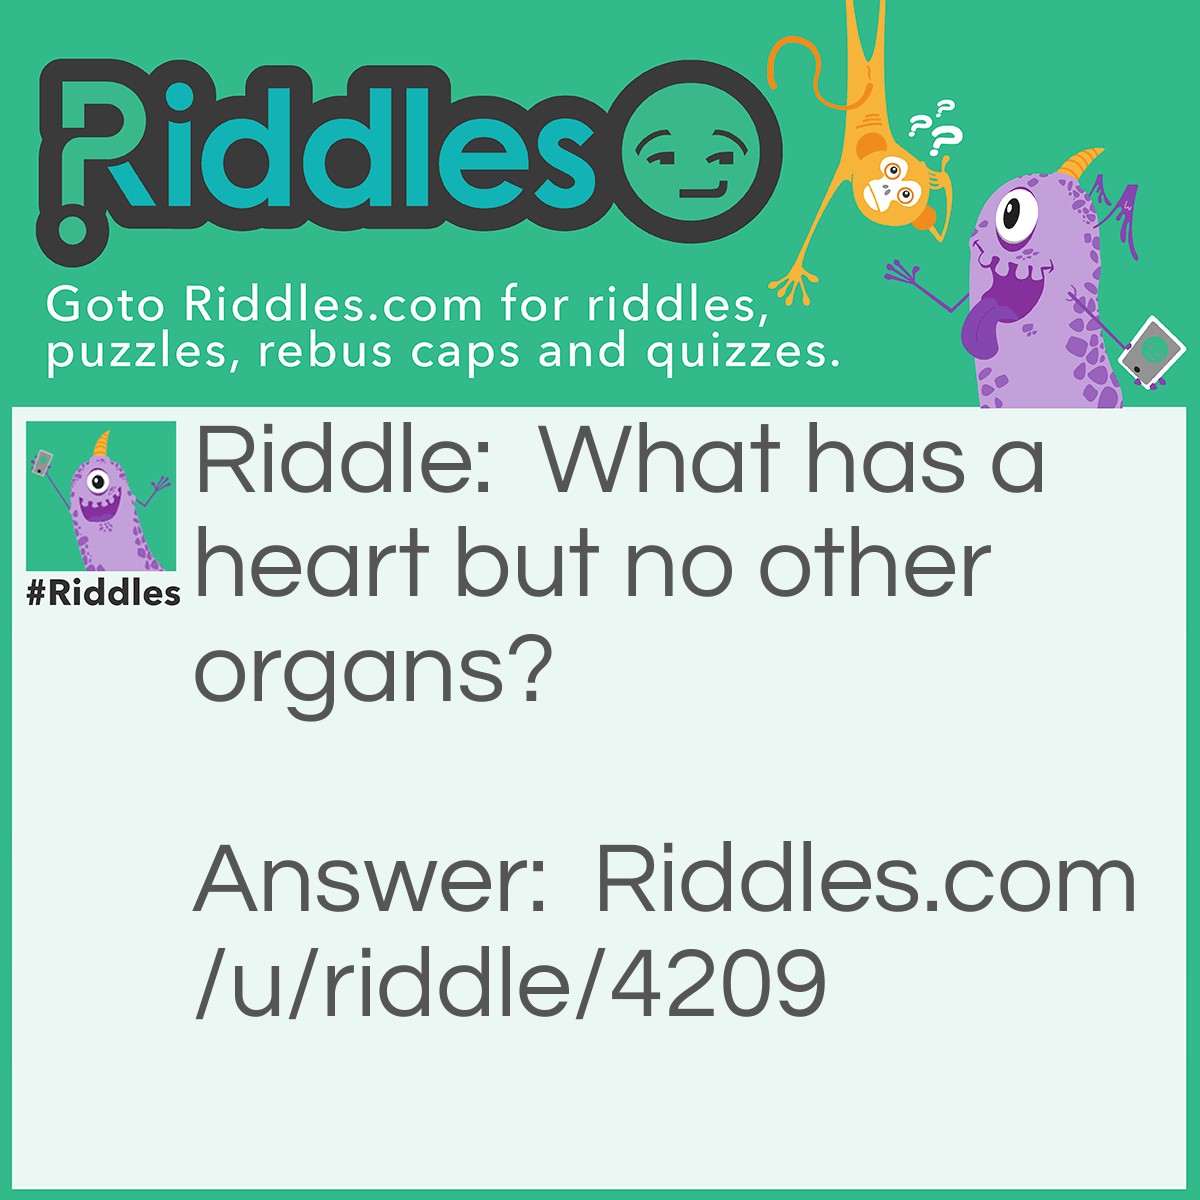 Riddle: What has a heart but no other organs? Answer: A deck of cards!